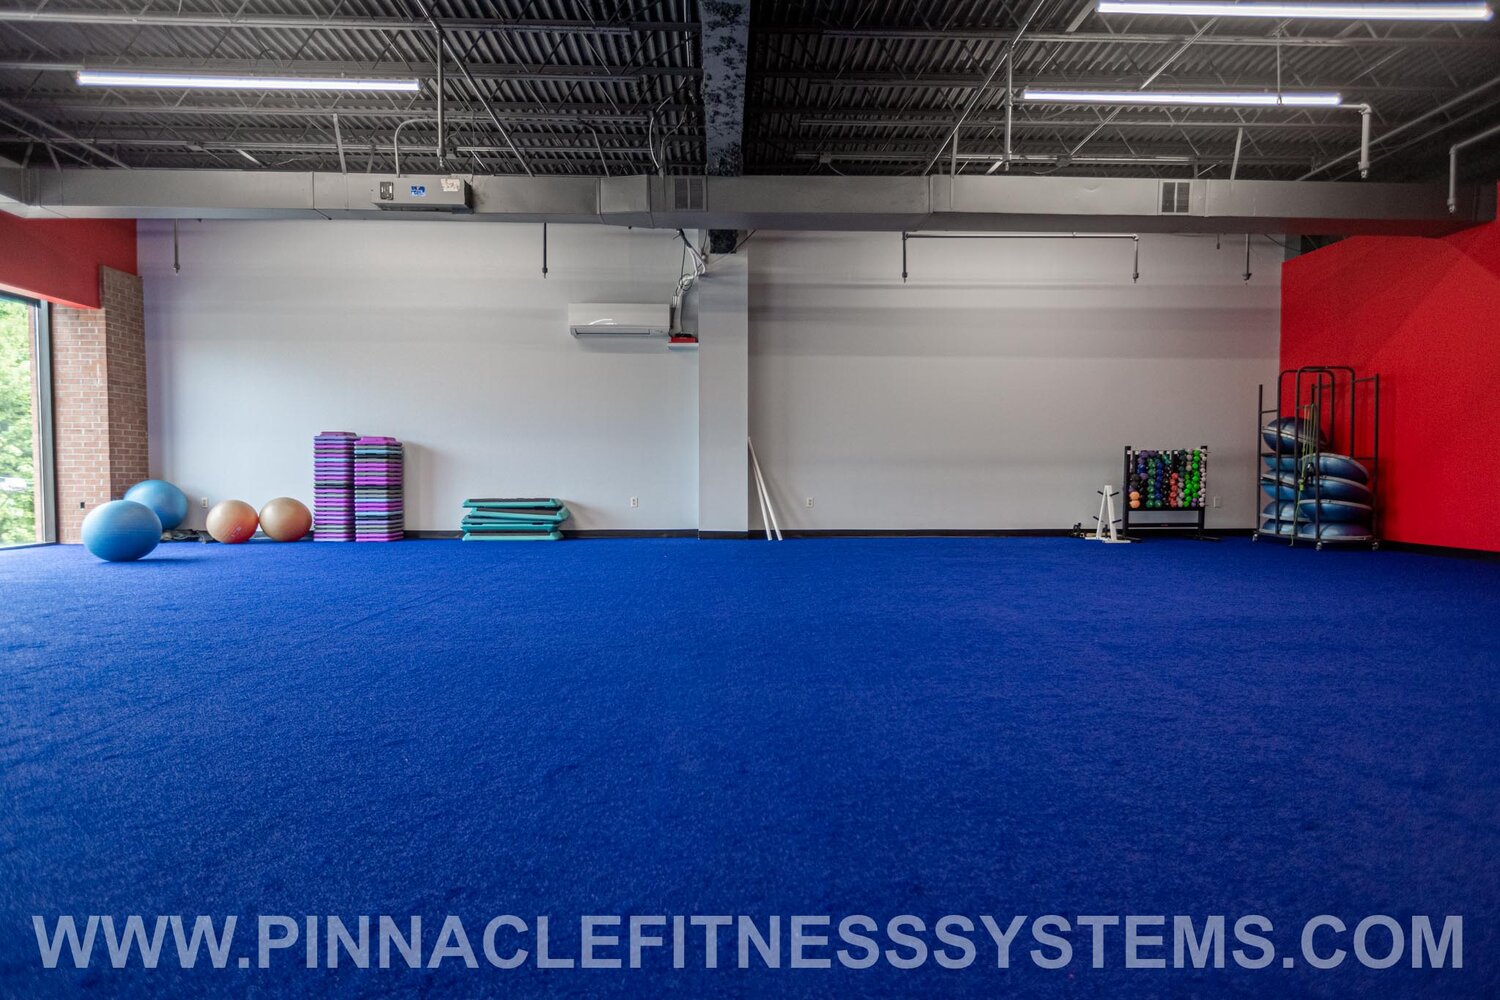 Pinnacle Fitness Systems